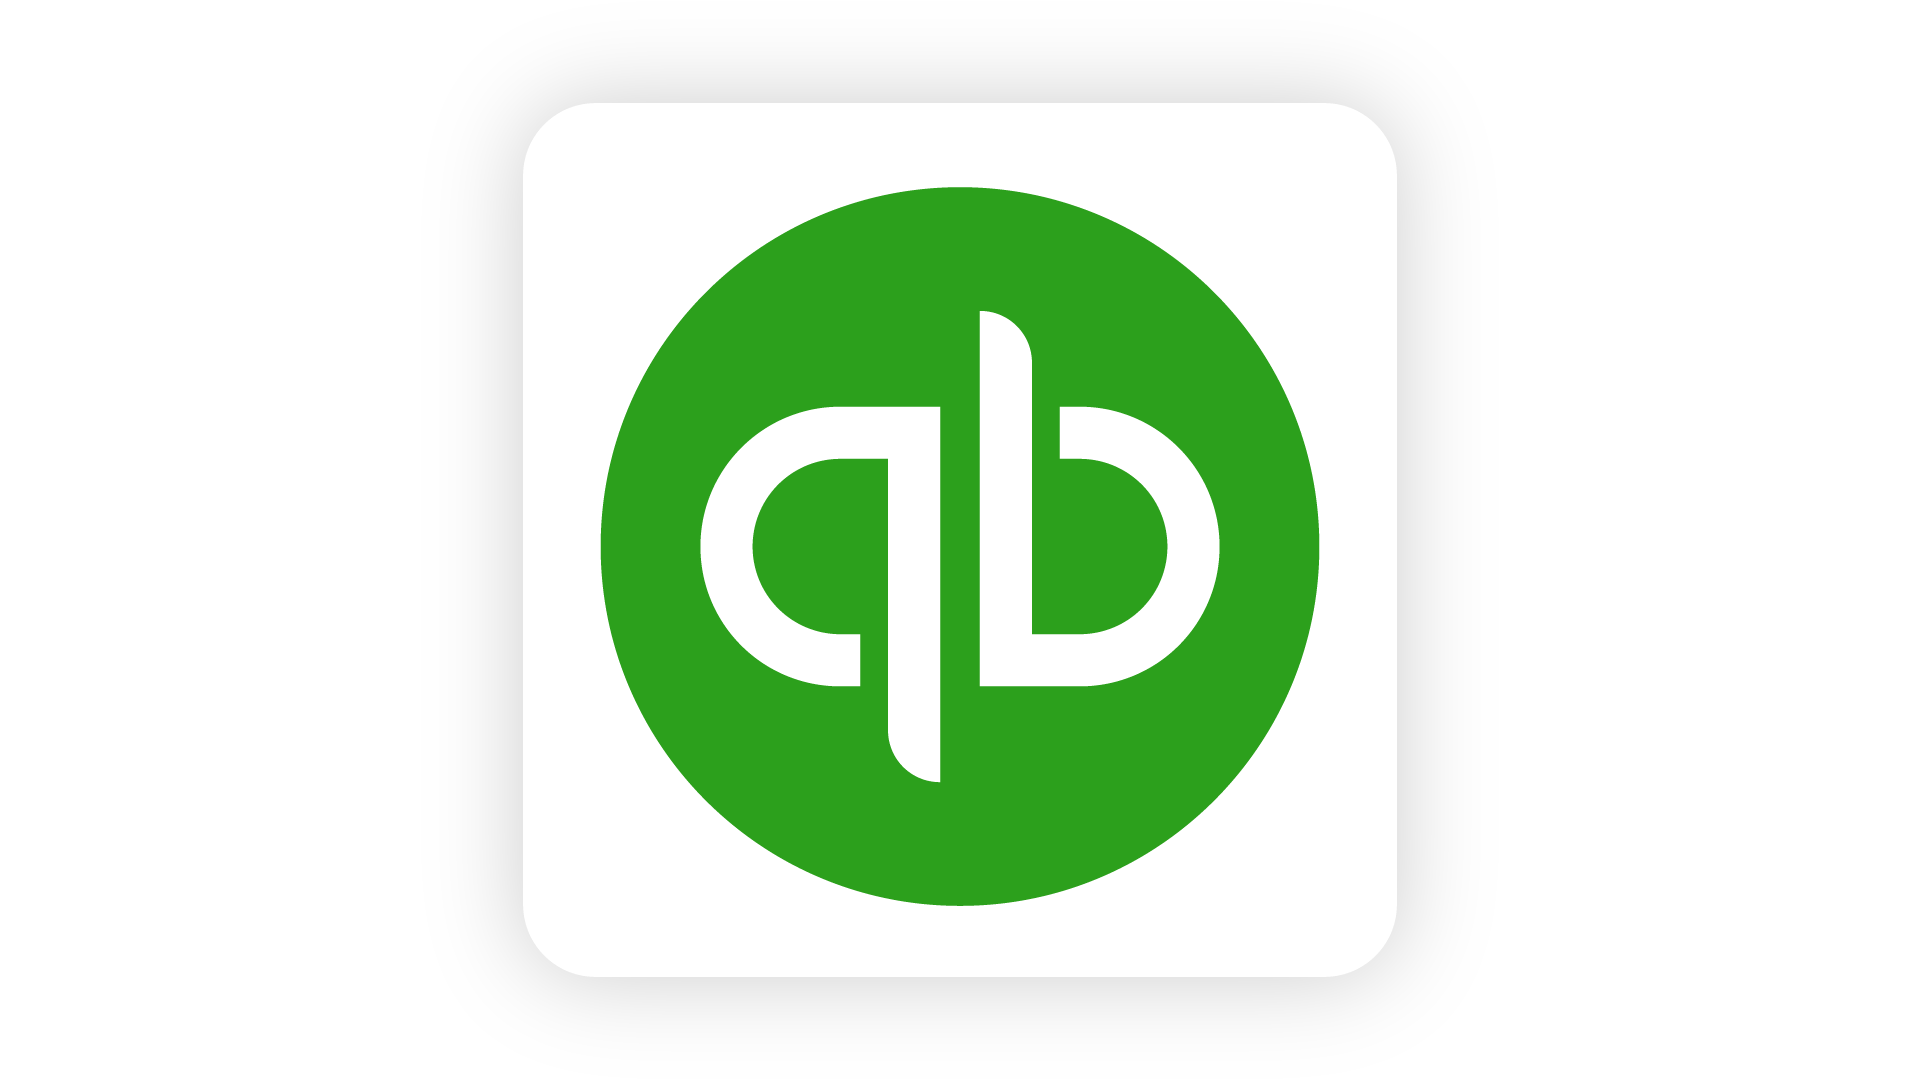 quickbooks download with cd